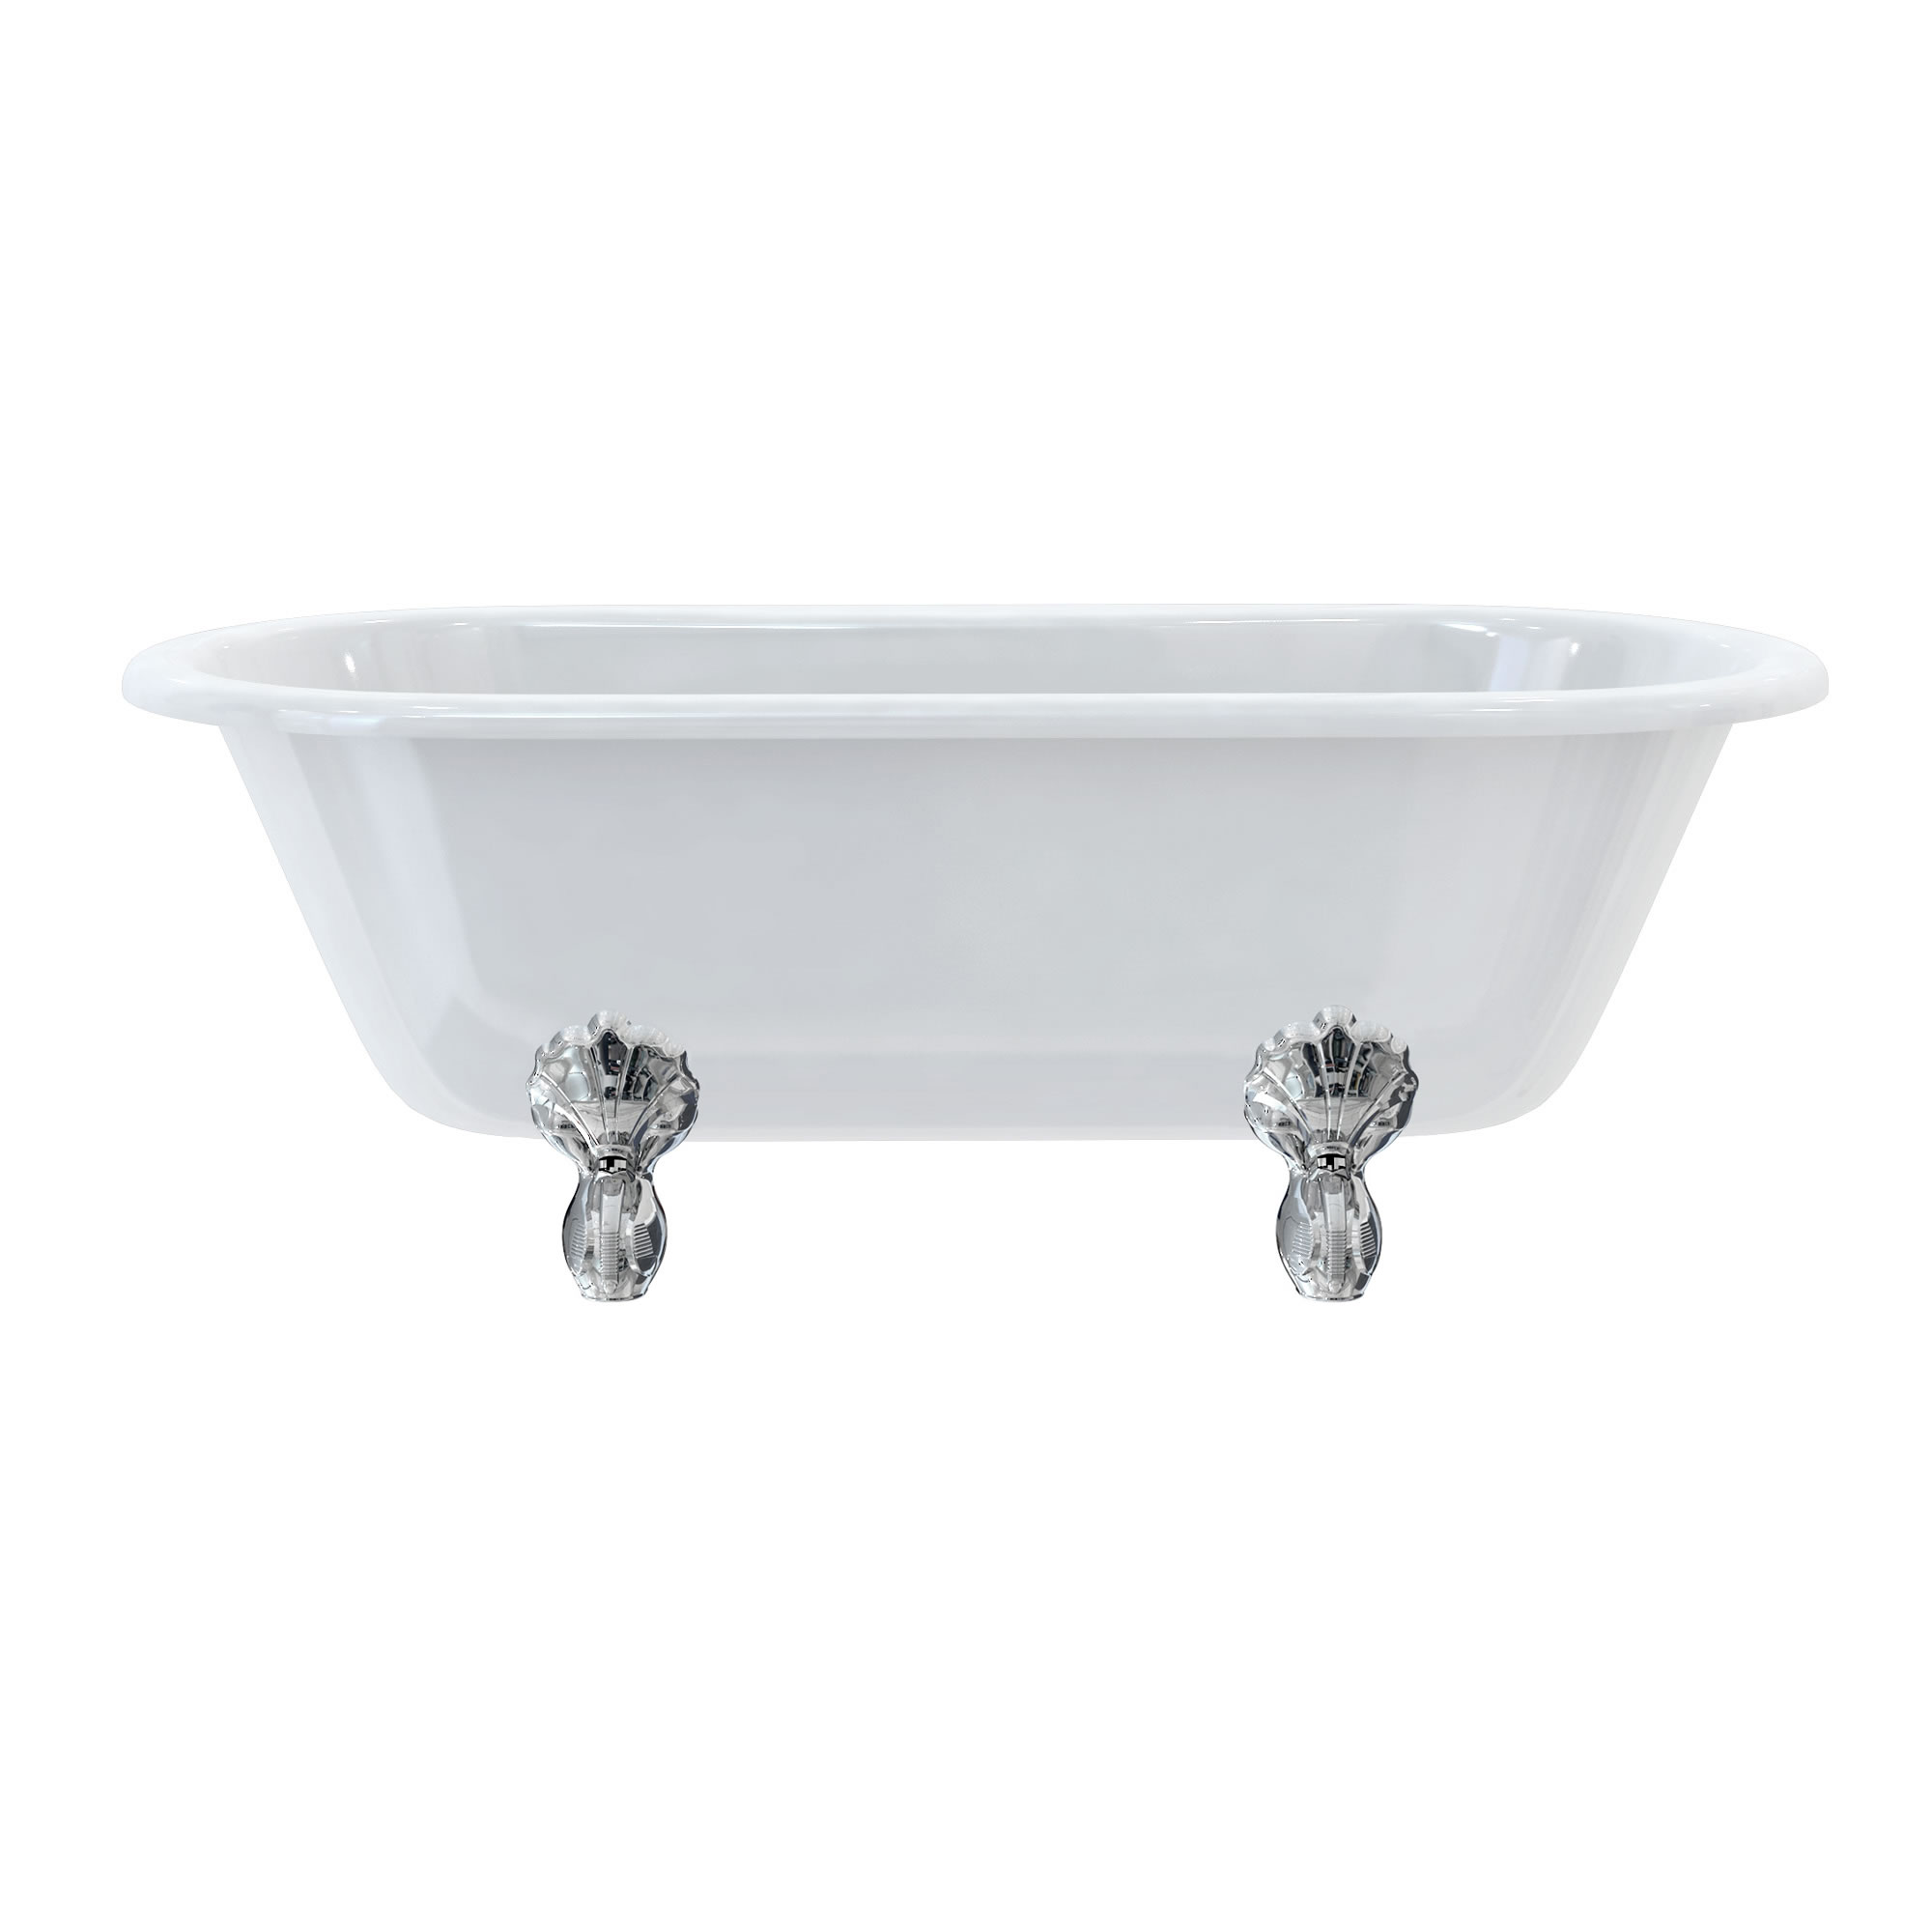 Windsor double ended 170cm bath with luxury legs